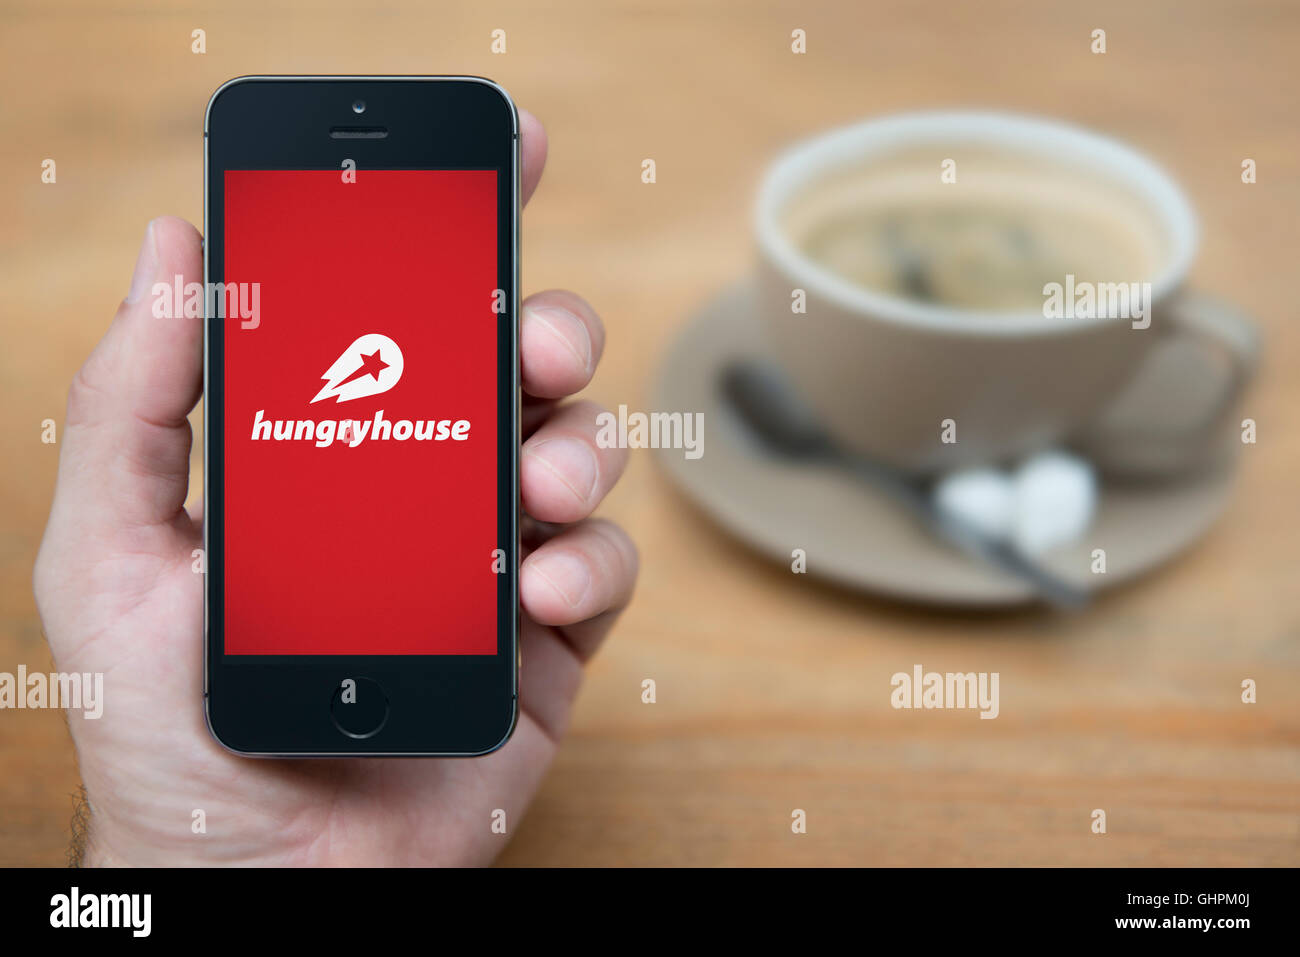 A man looks at his iPhone which displays the Hungry House logo, while sat with a cup of coffee (Editorial use only). Stock Photo